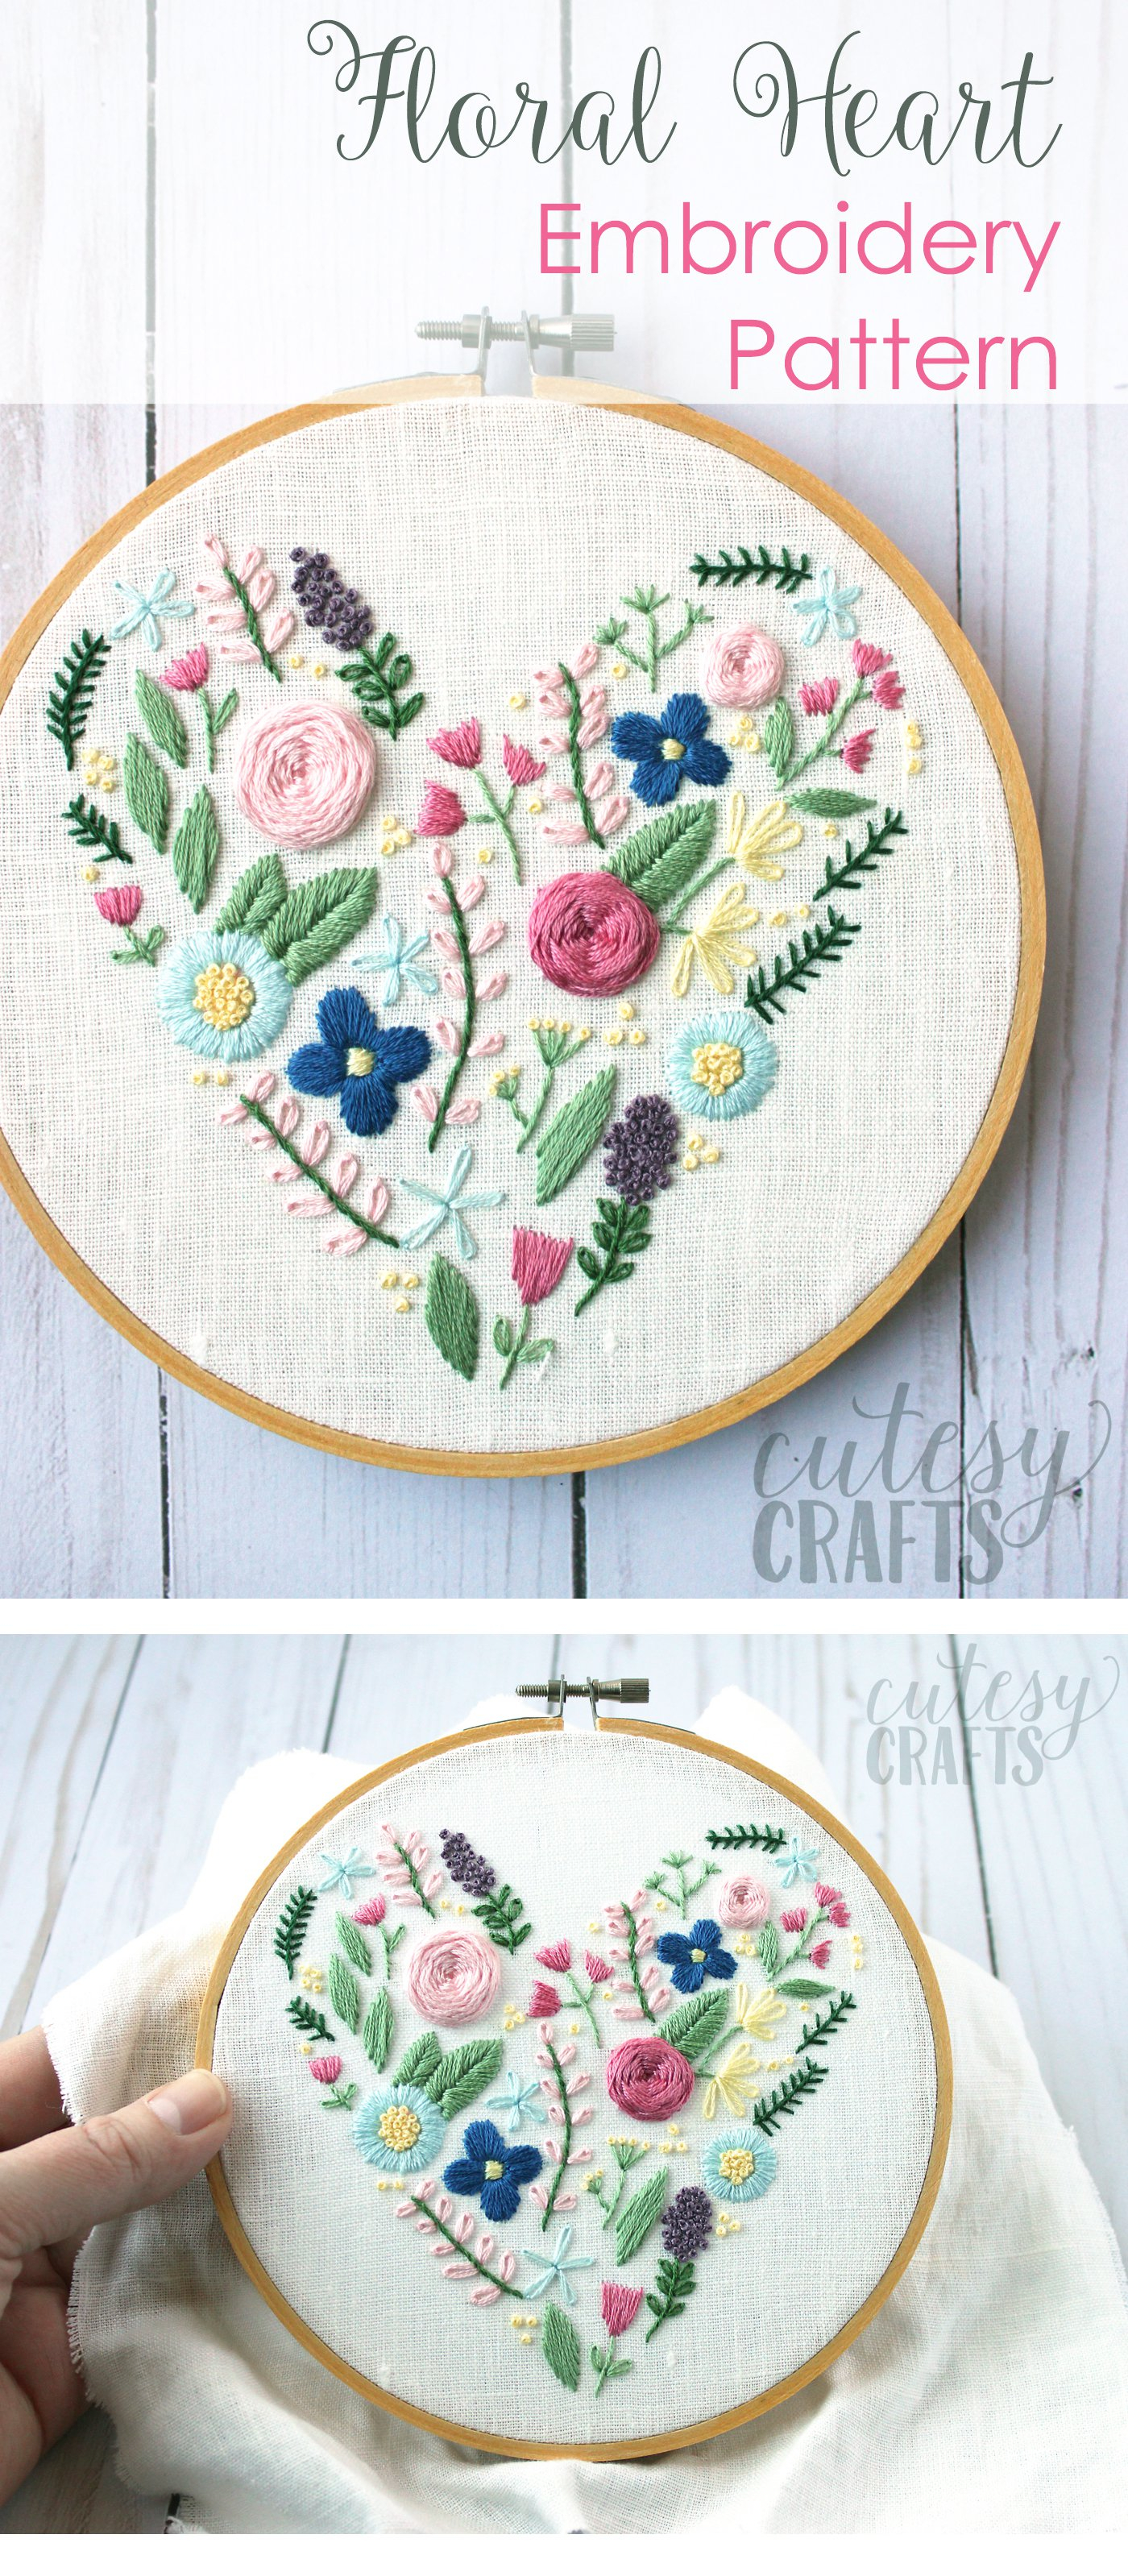 Free Printable Embroidery Patterns By Hand Floral Heart Hand Embroidery Pattern The Polka Dot Chair